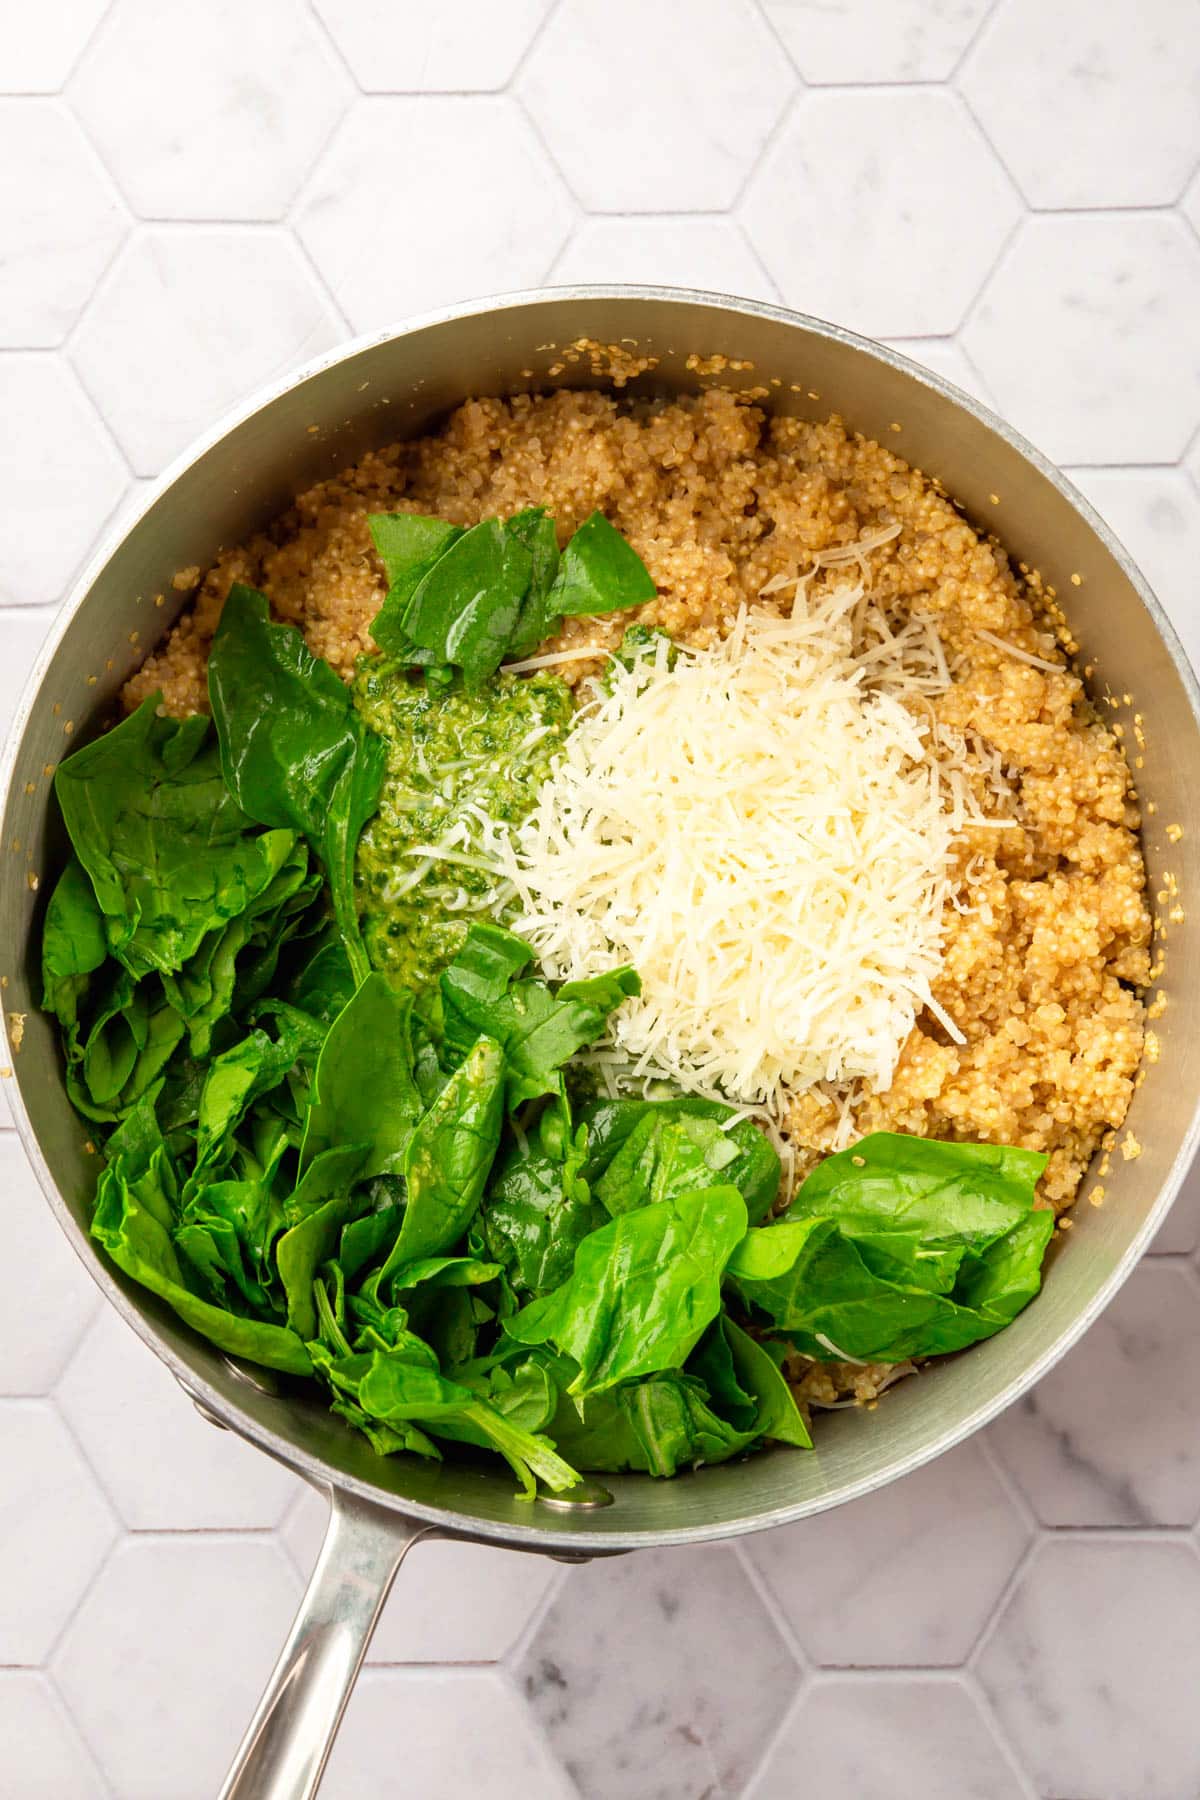 A stainless steel pot filled with quinoa, shredded parmesan cheese, spinach and pesto before mixing together.